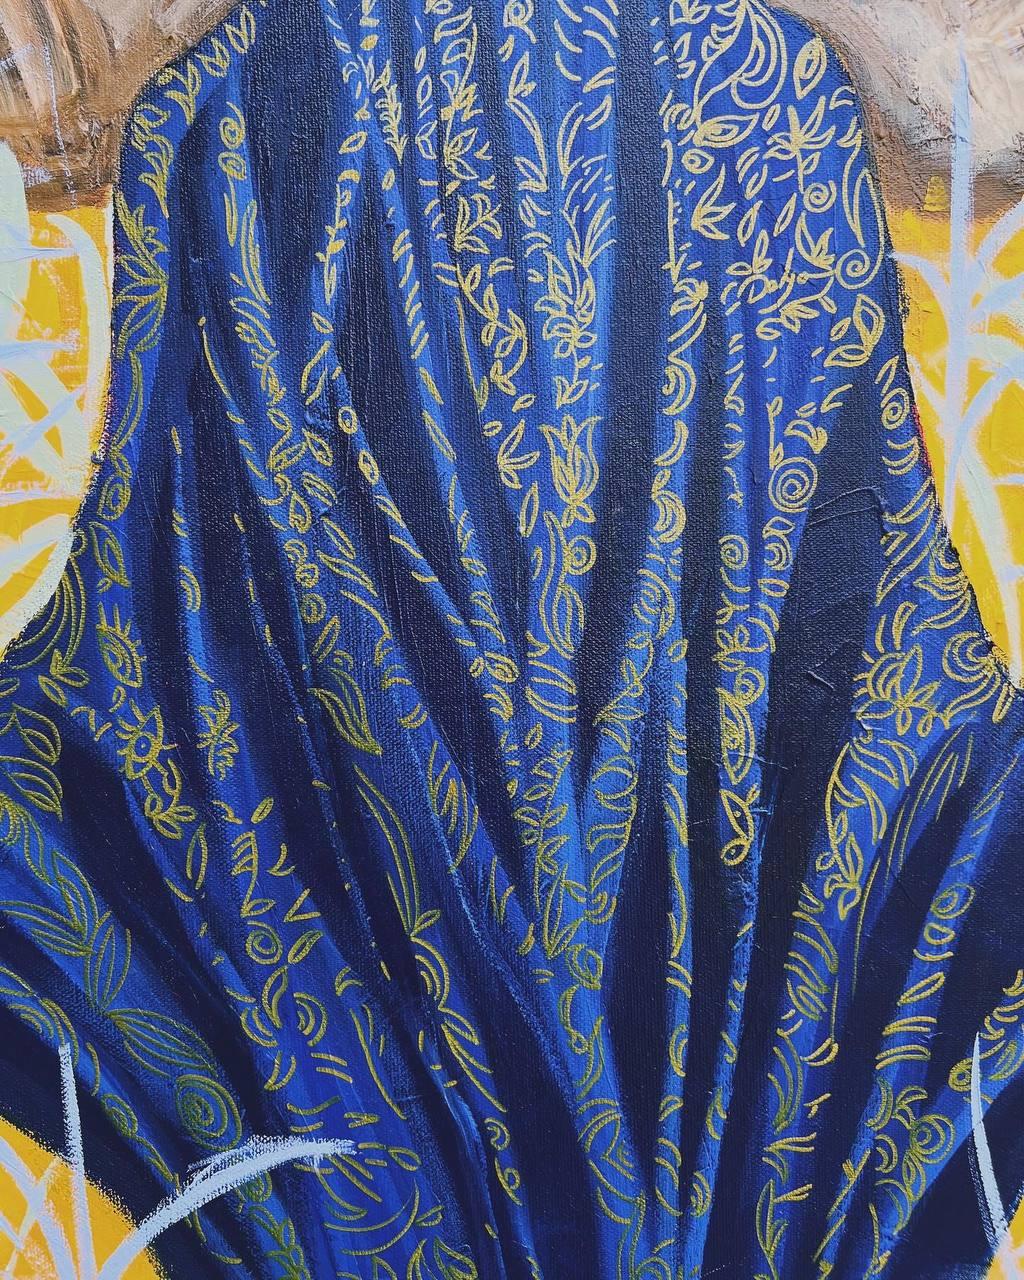 Butterfly, 150x110 cm - Painting by Majnun